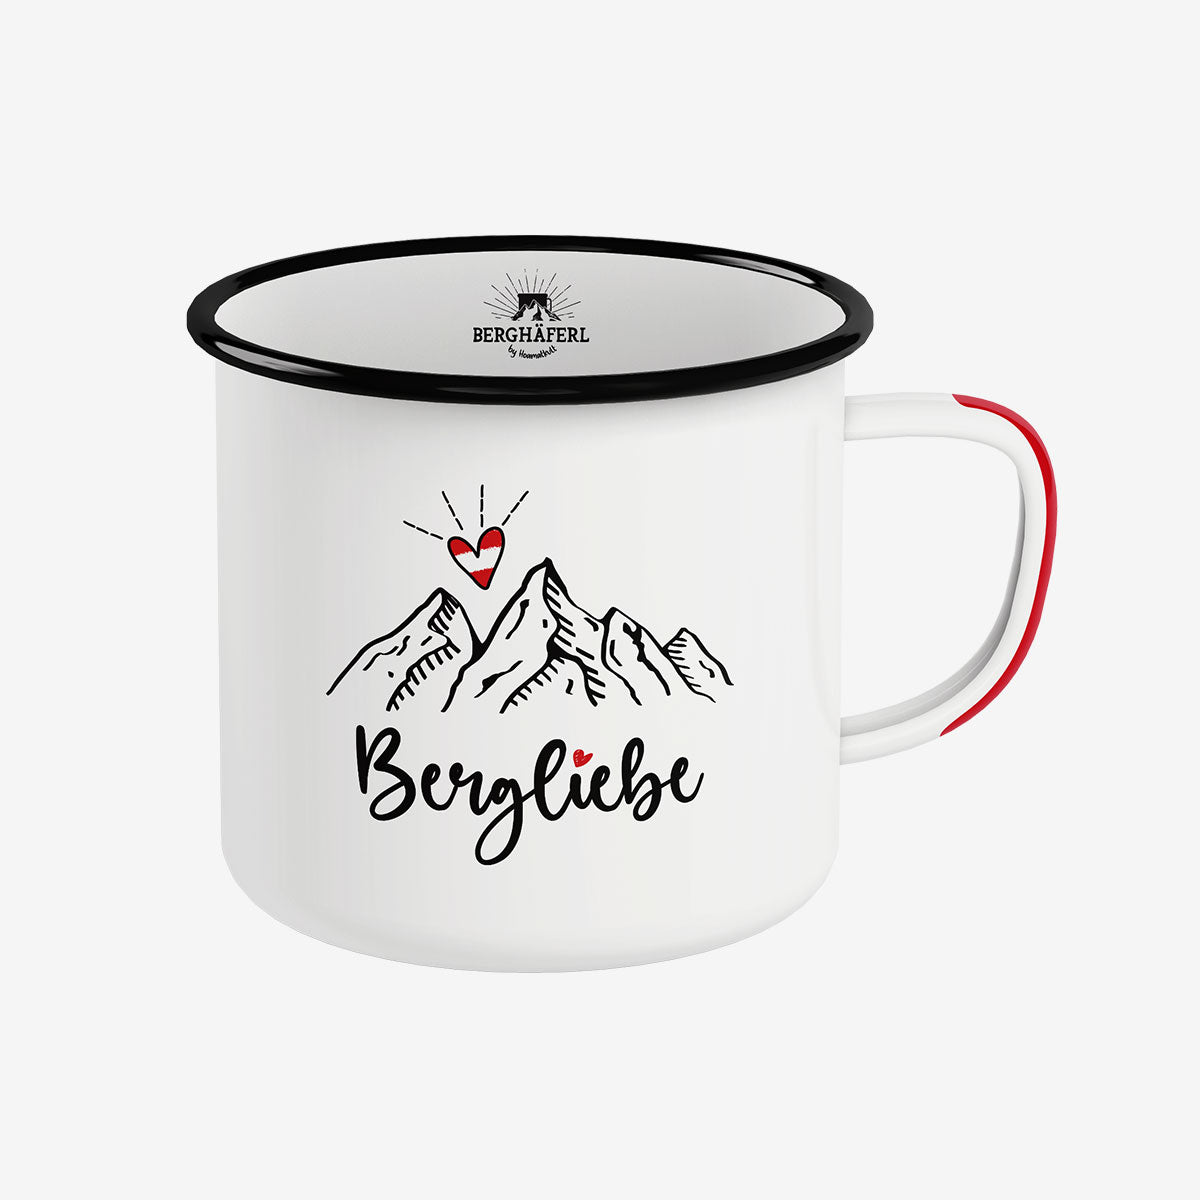 Bergliebe Emaille Tasse